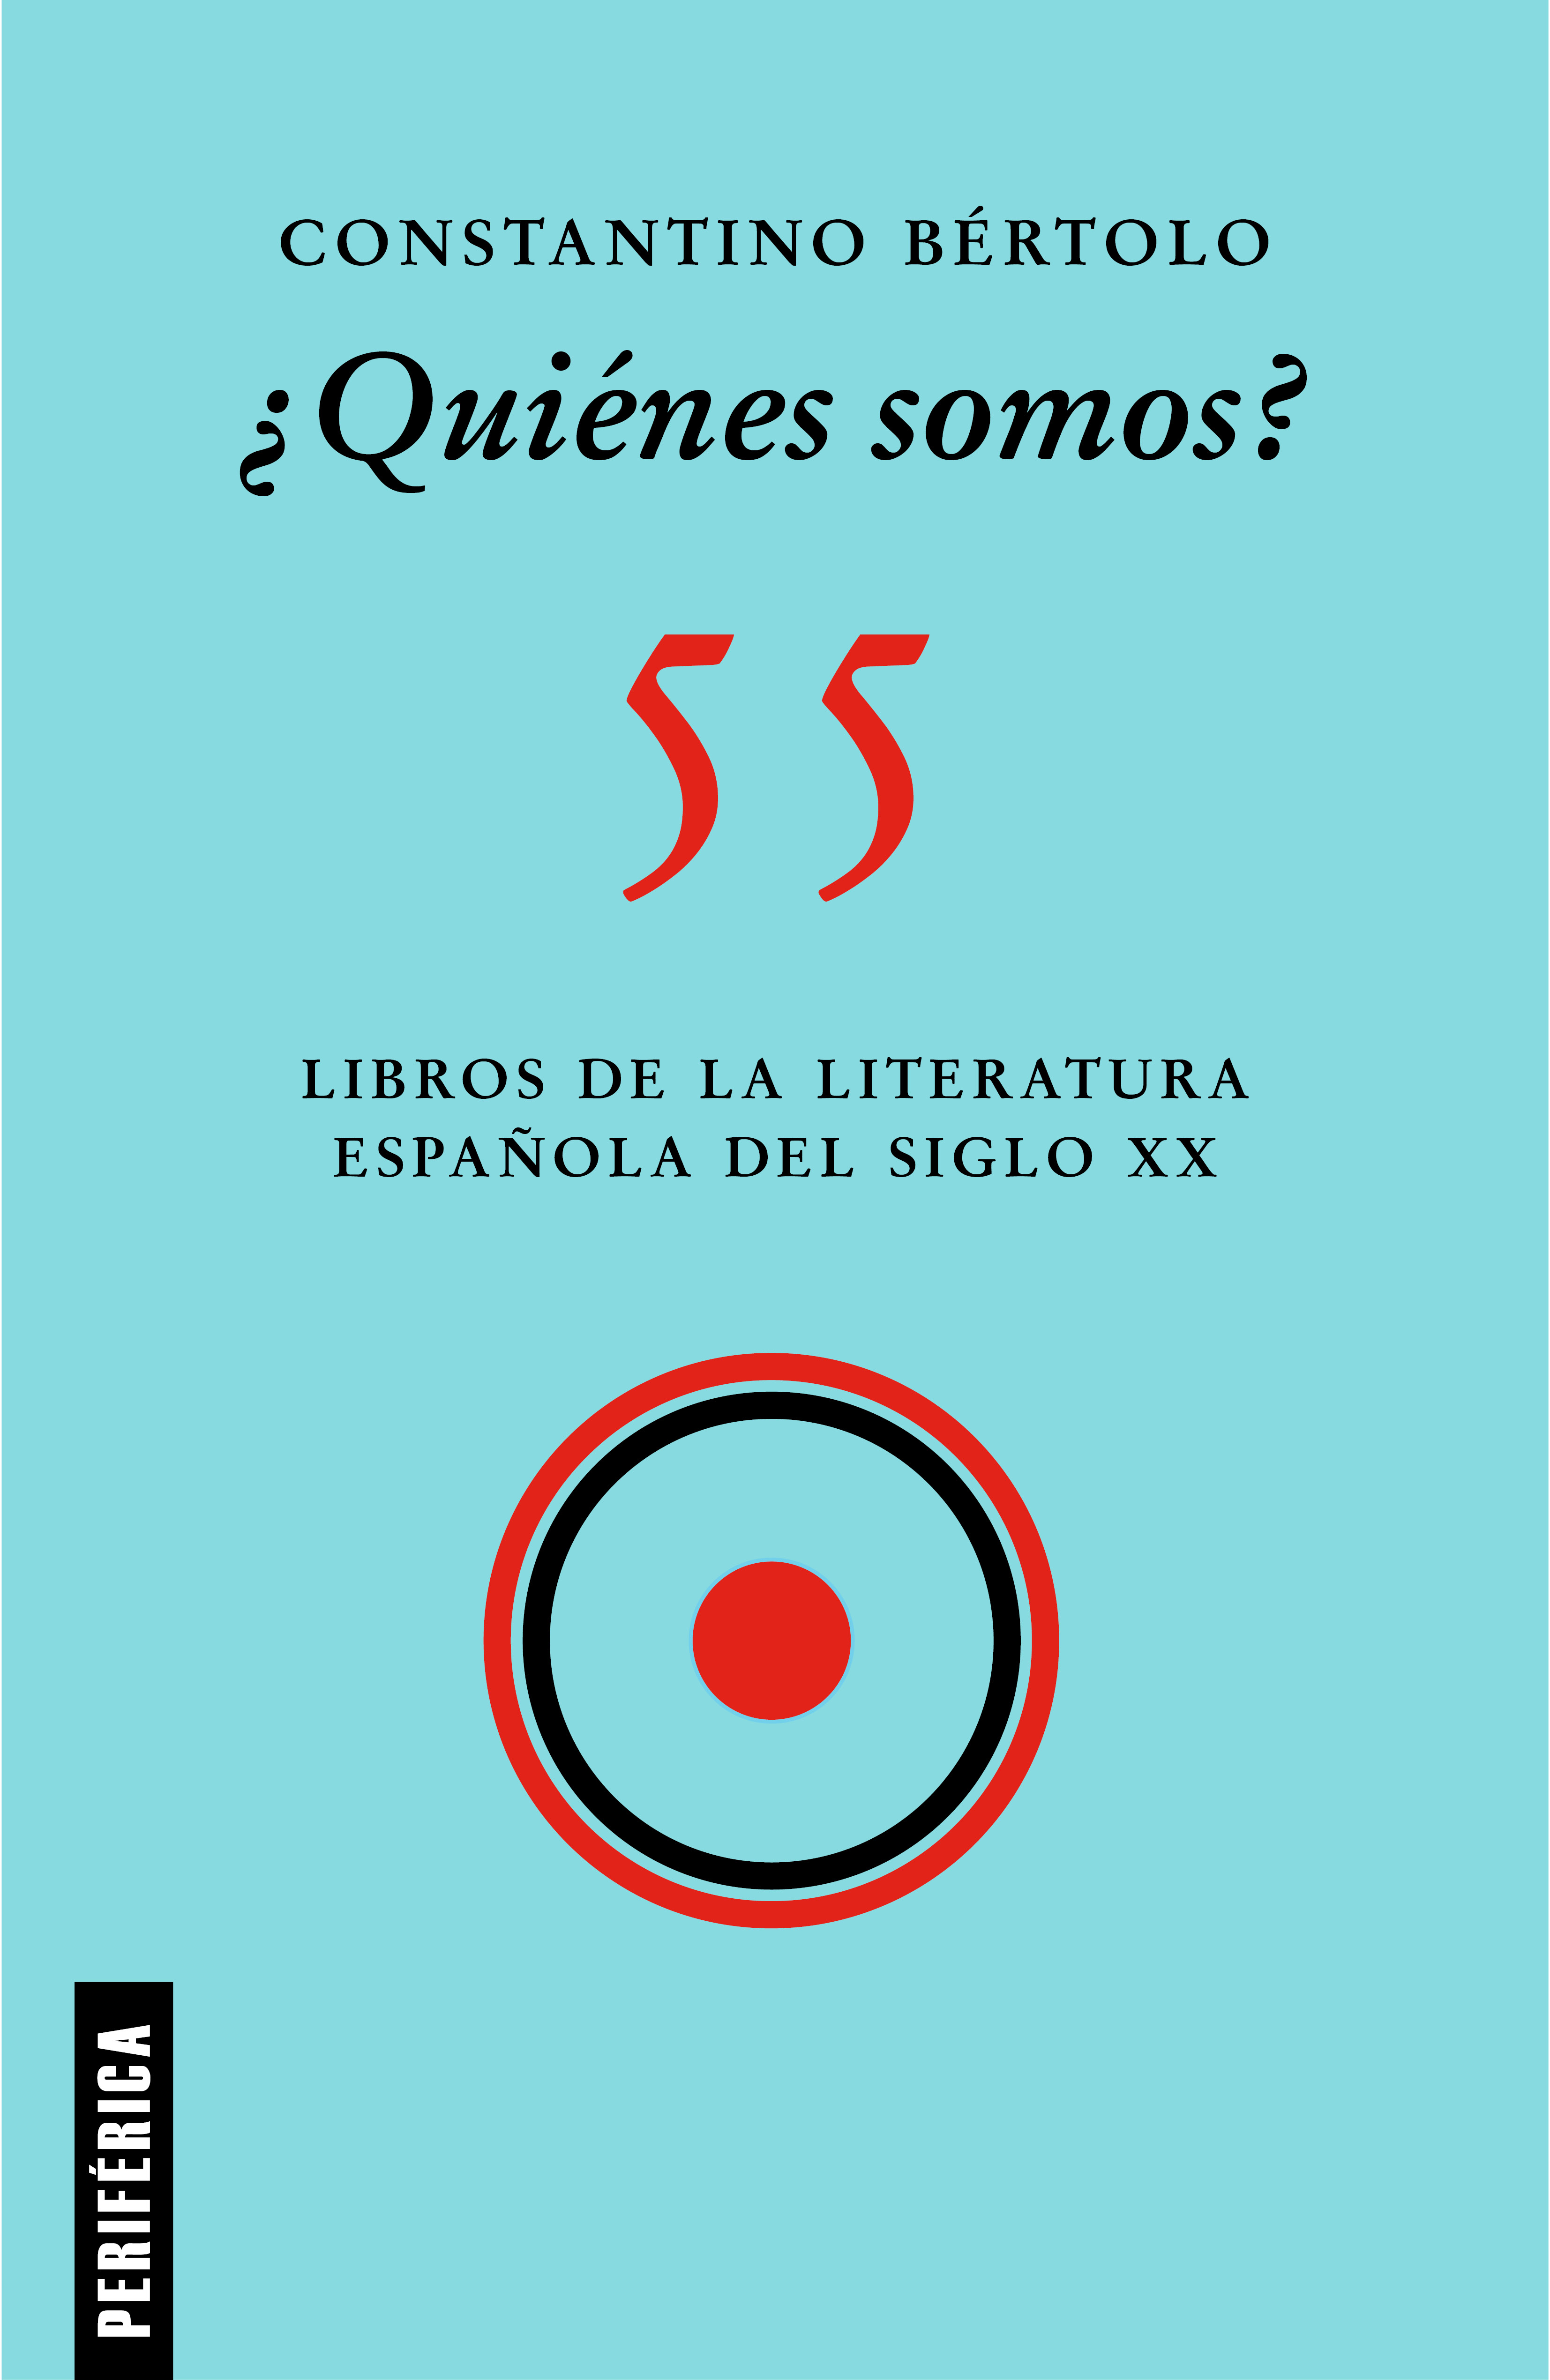 Who are we? 55 books of the 20th century Spanish literature